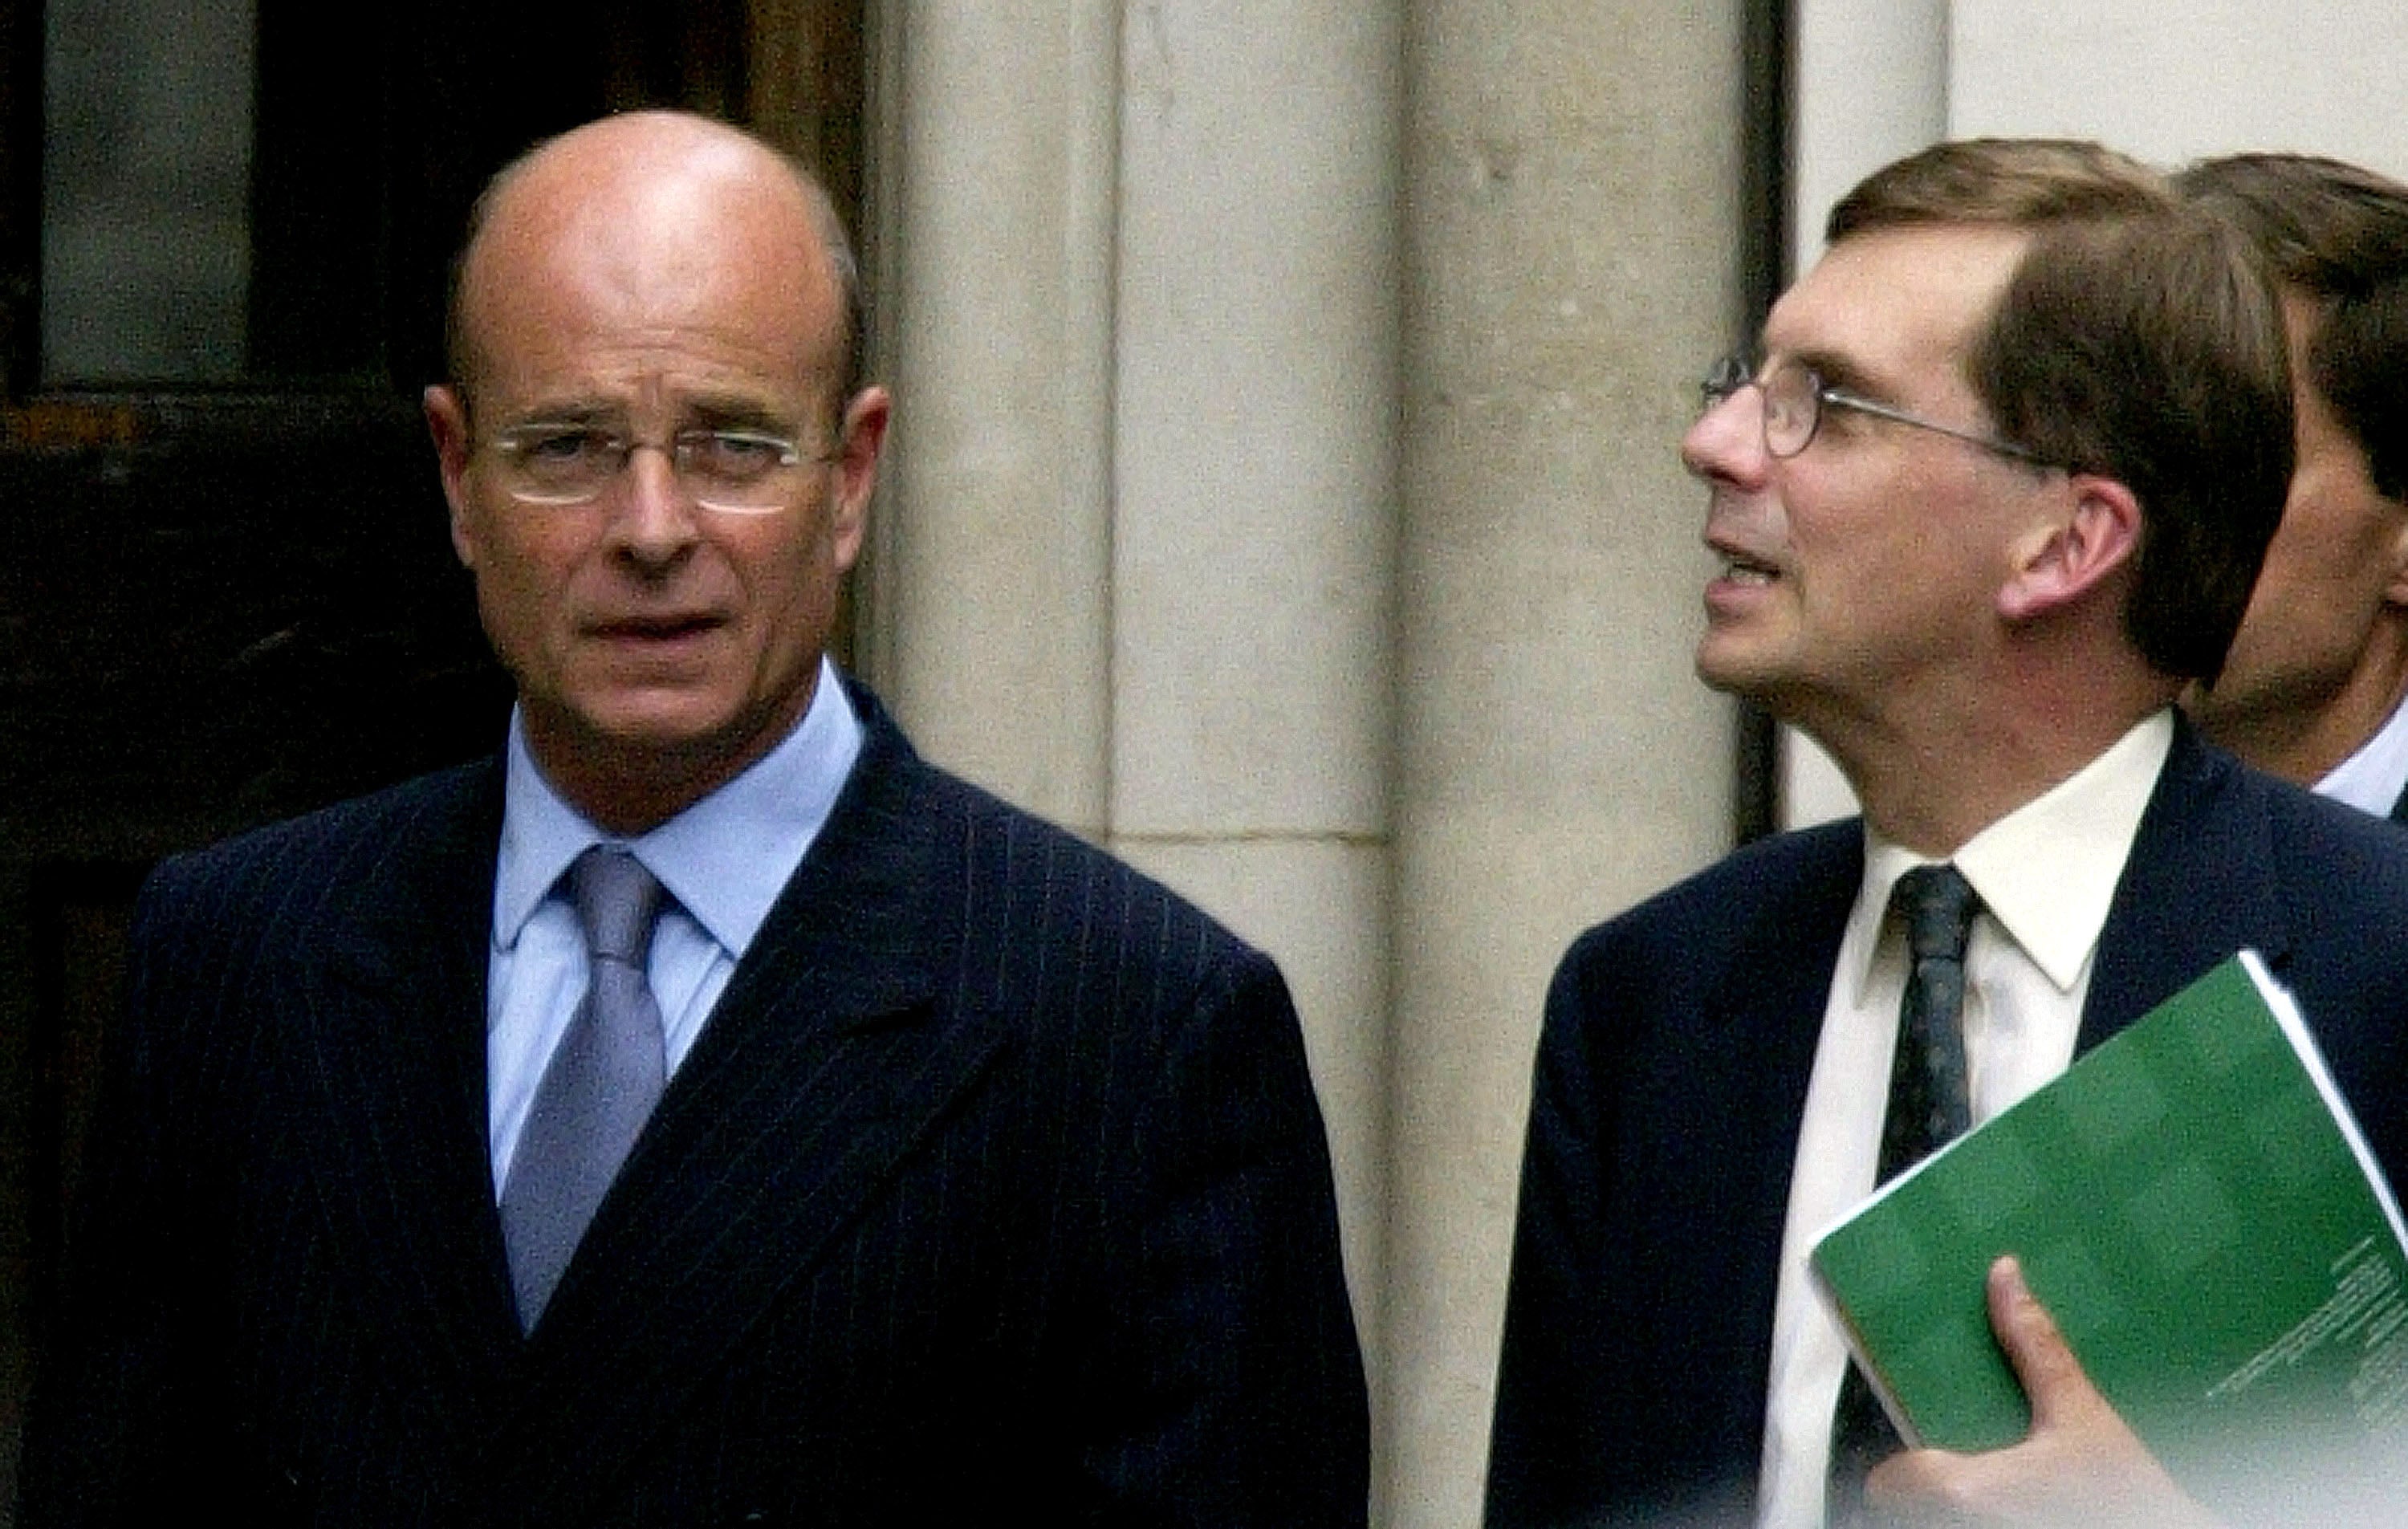 Sir David Omand, right, called the development a "huge strategic setback" for the west - although Downing Street confirmed that there was no evidence of anyone being harmed as a result of Snowden's leaks.